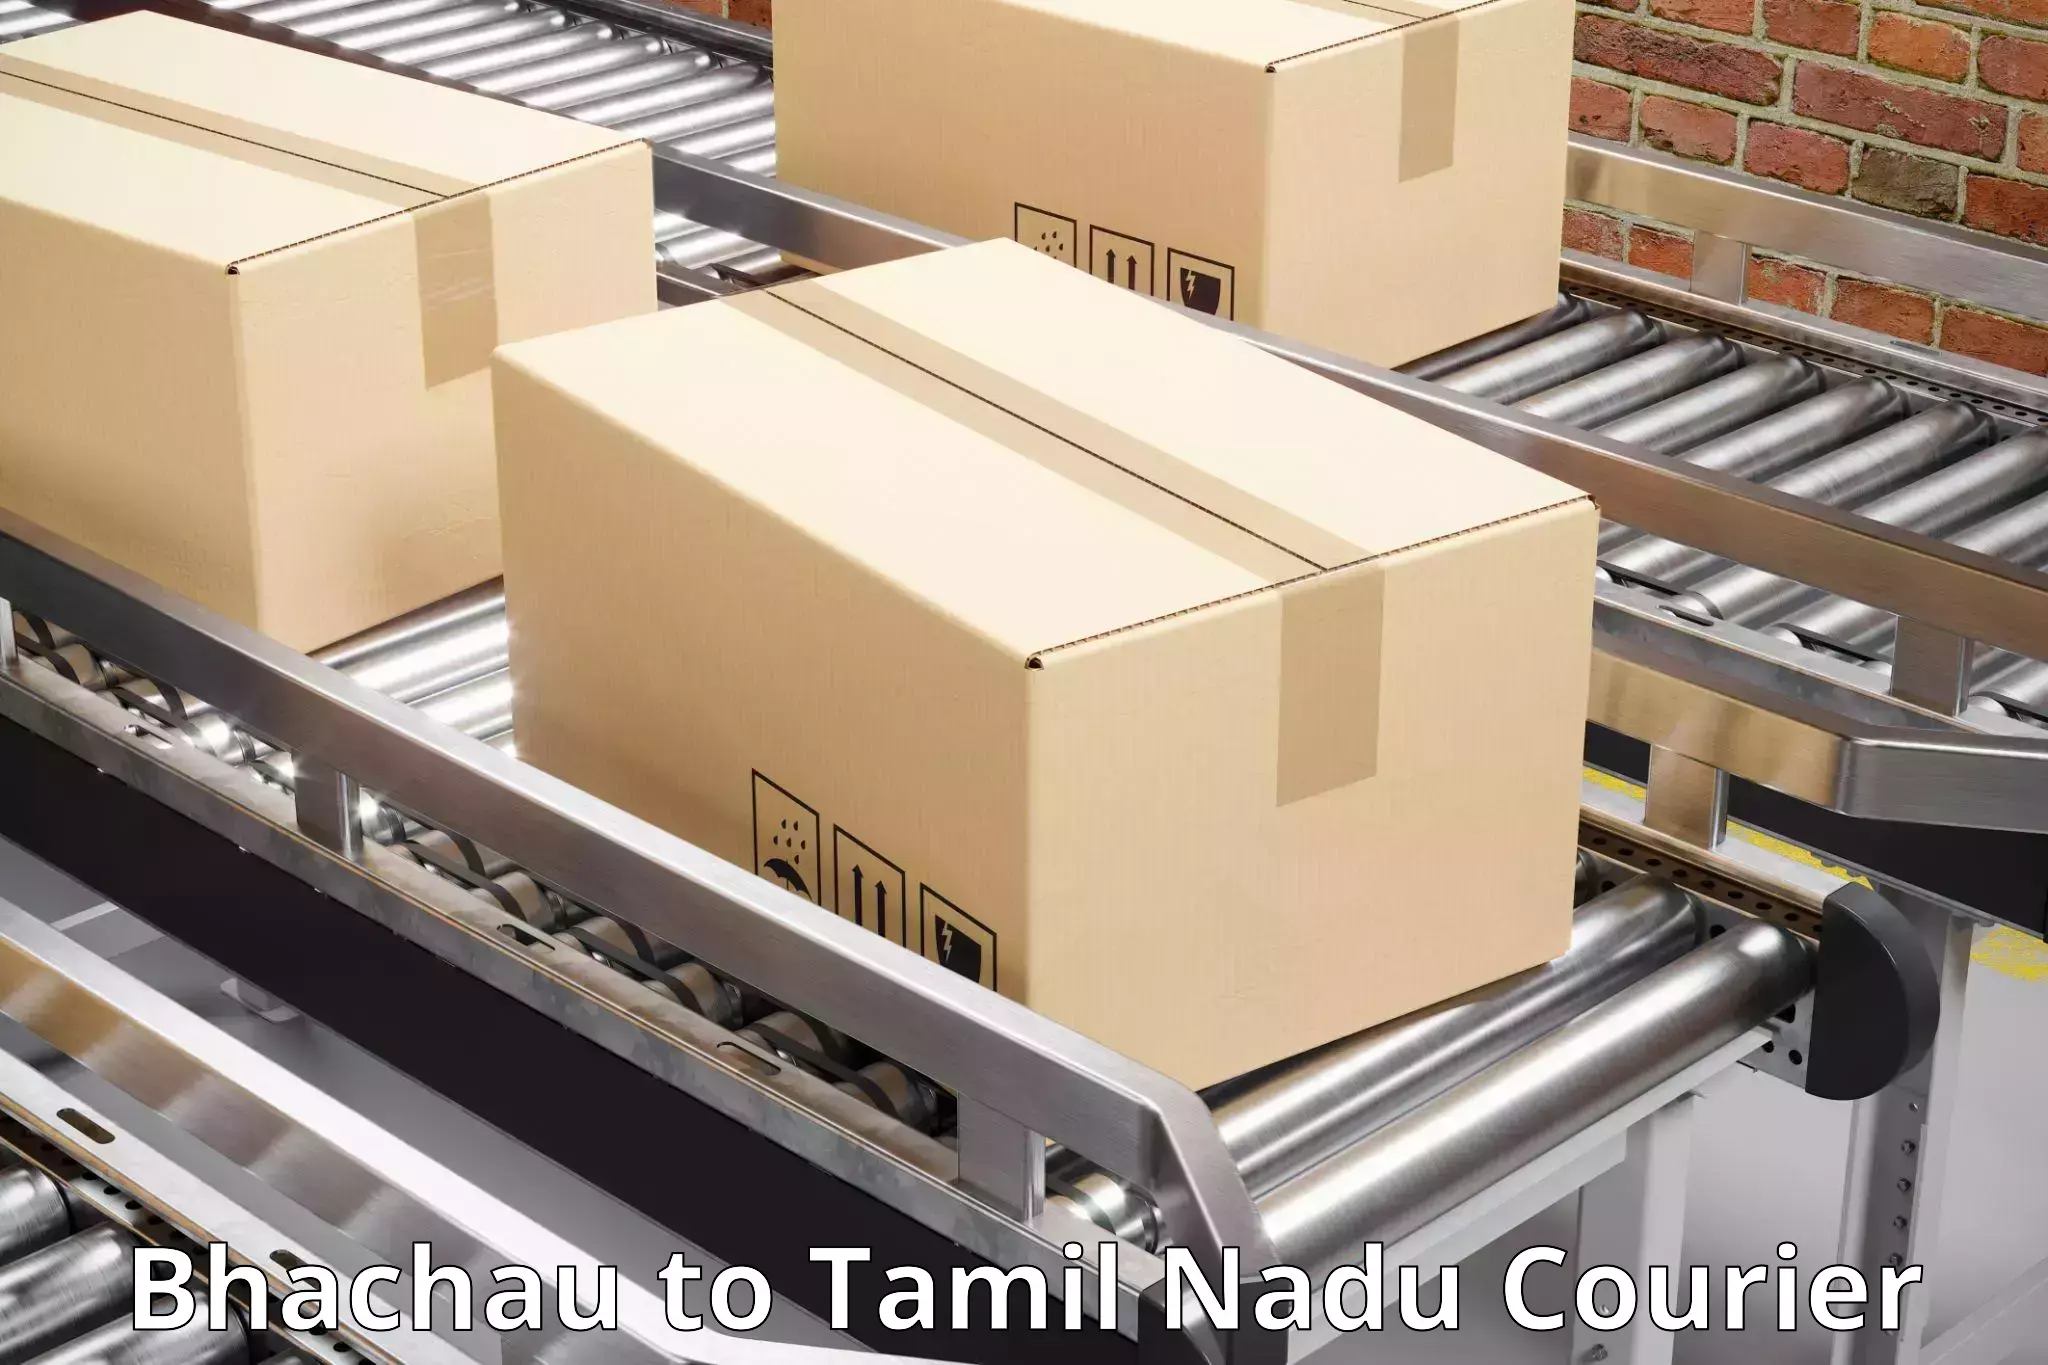 Personalized courier experiences Bhachau to Madurai